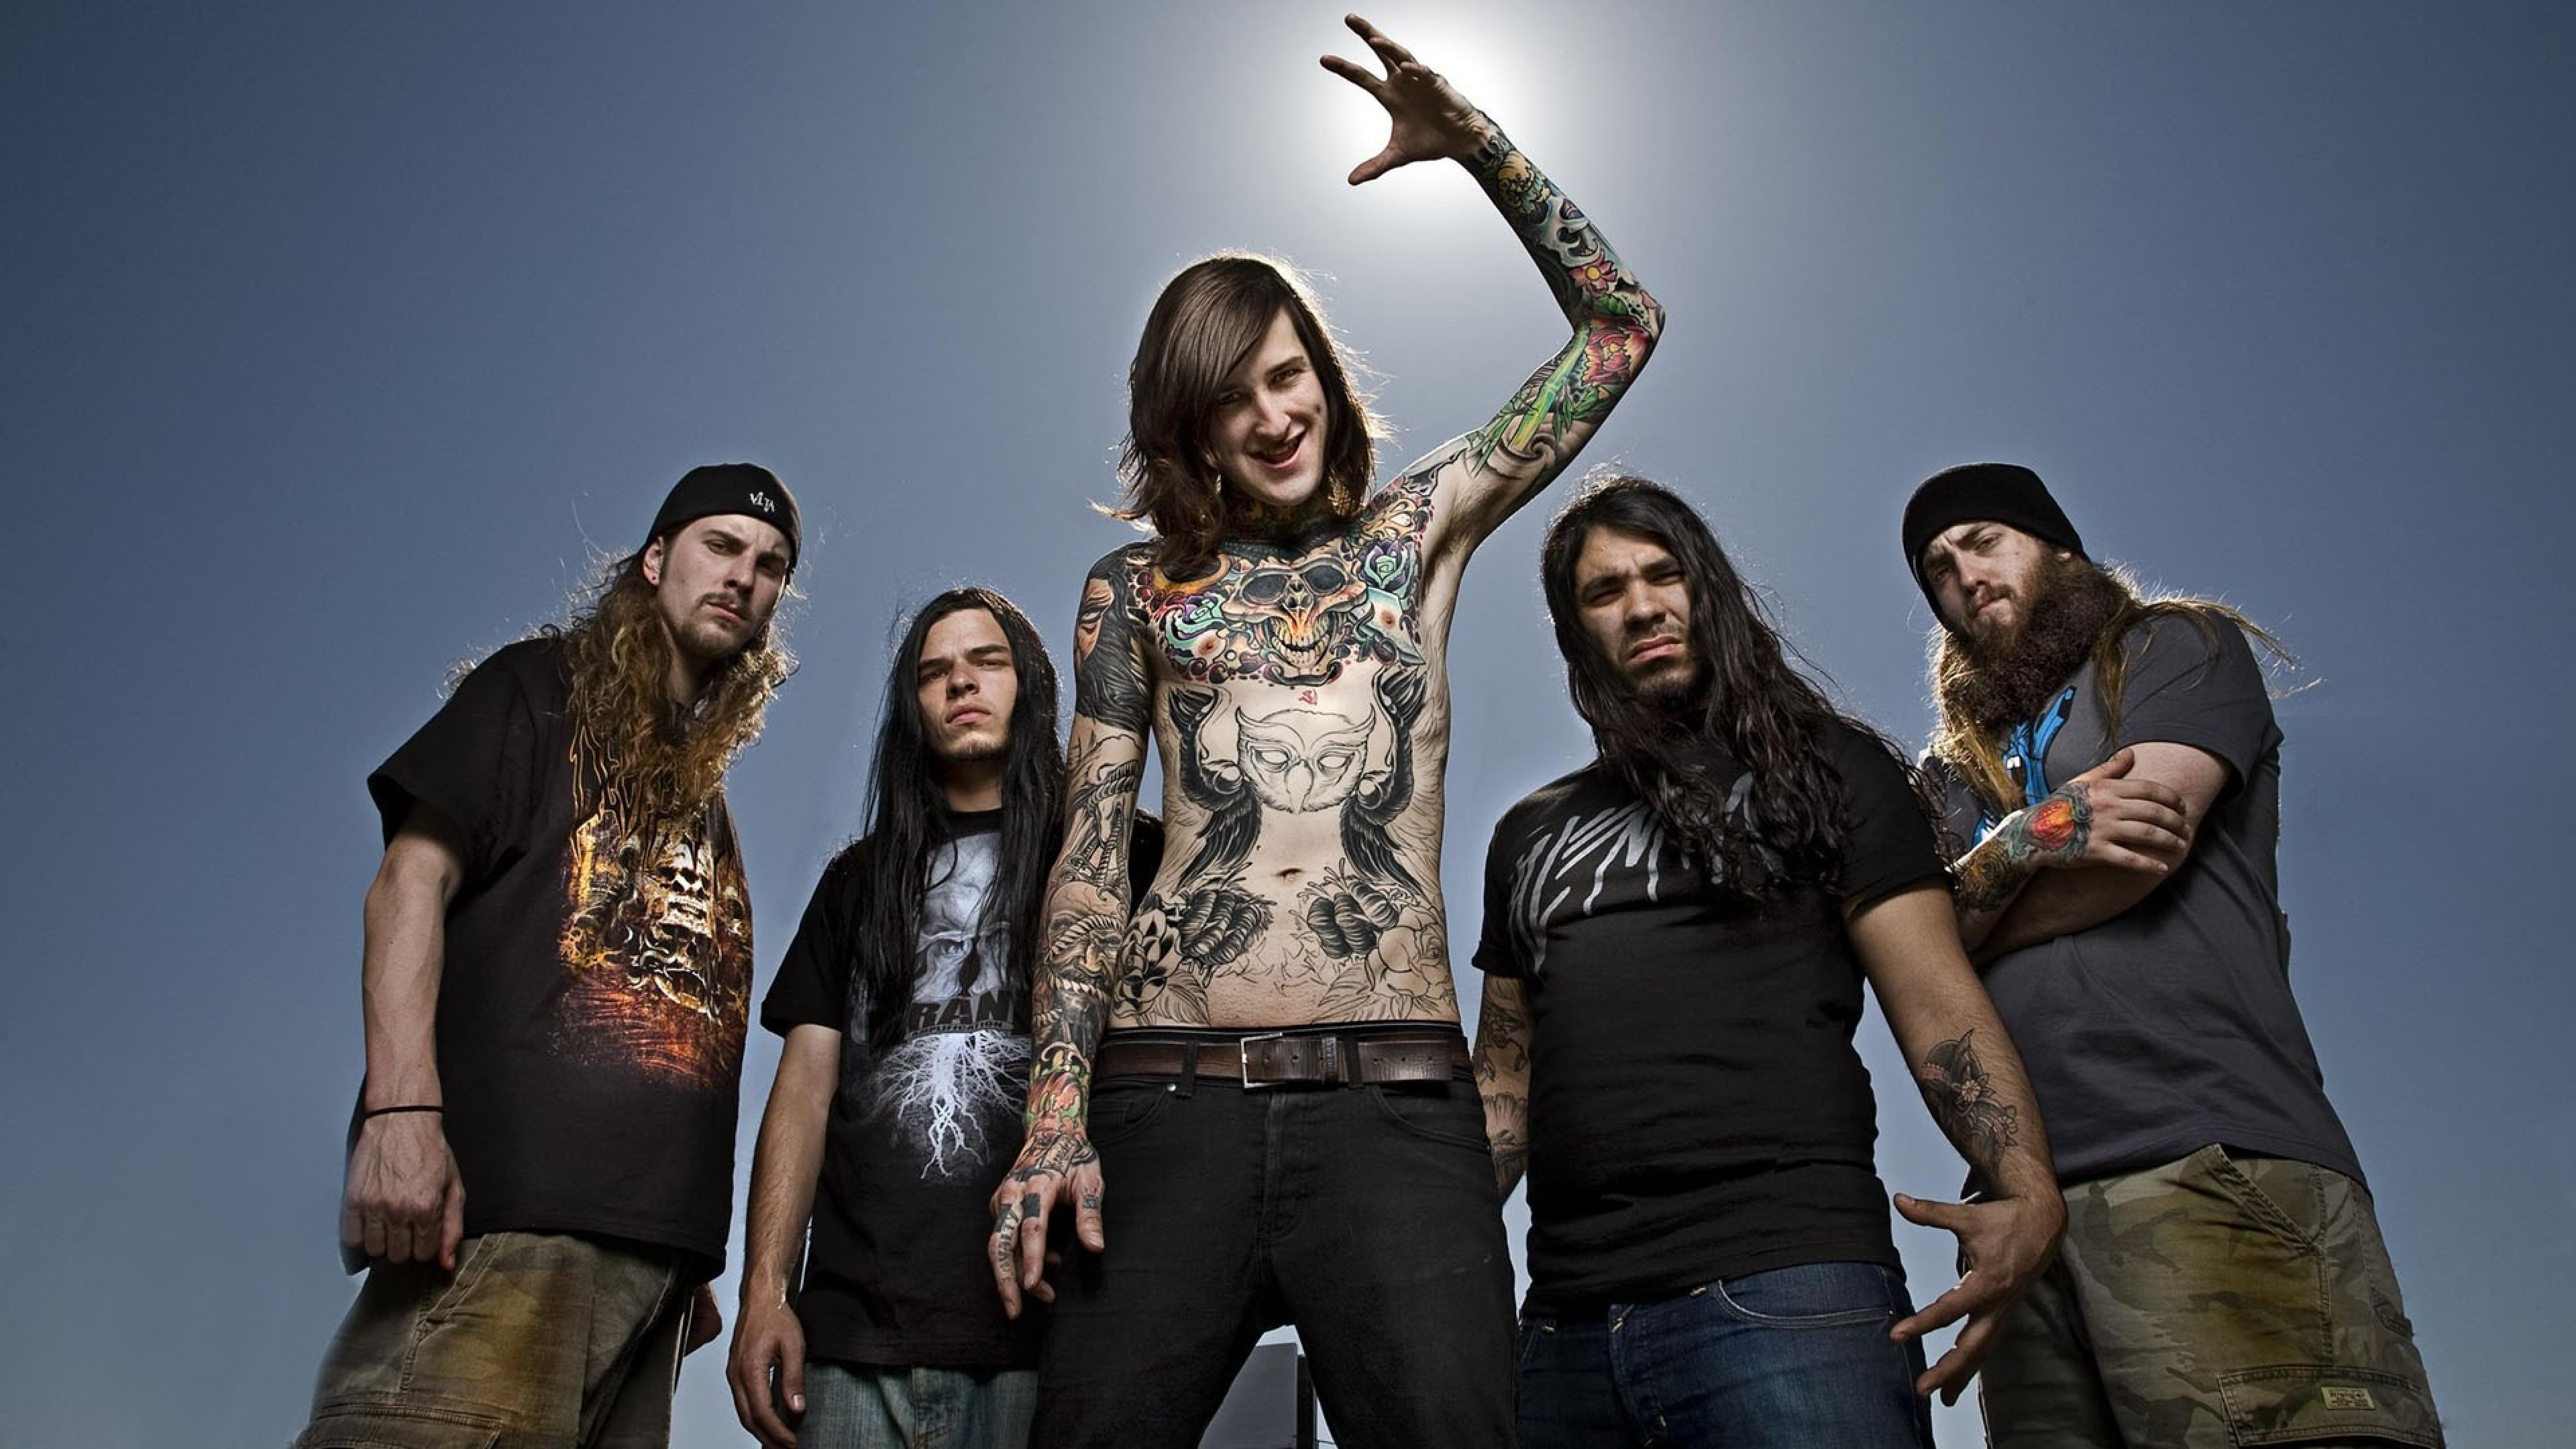 Download Wallpaper 3840x2160 Suicide silence, Tattoo, Rockers, Sky ...